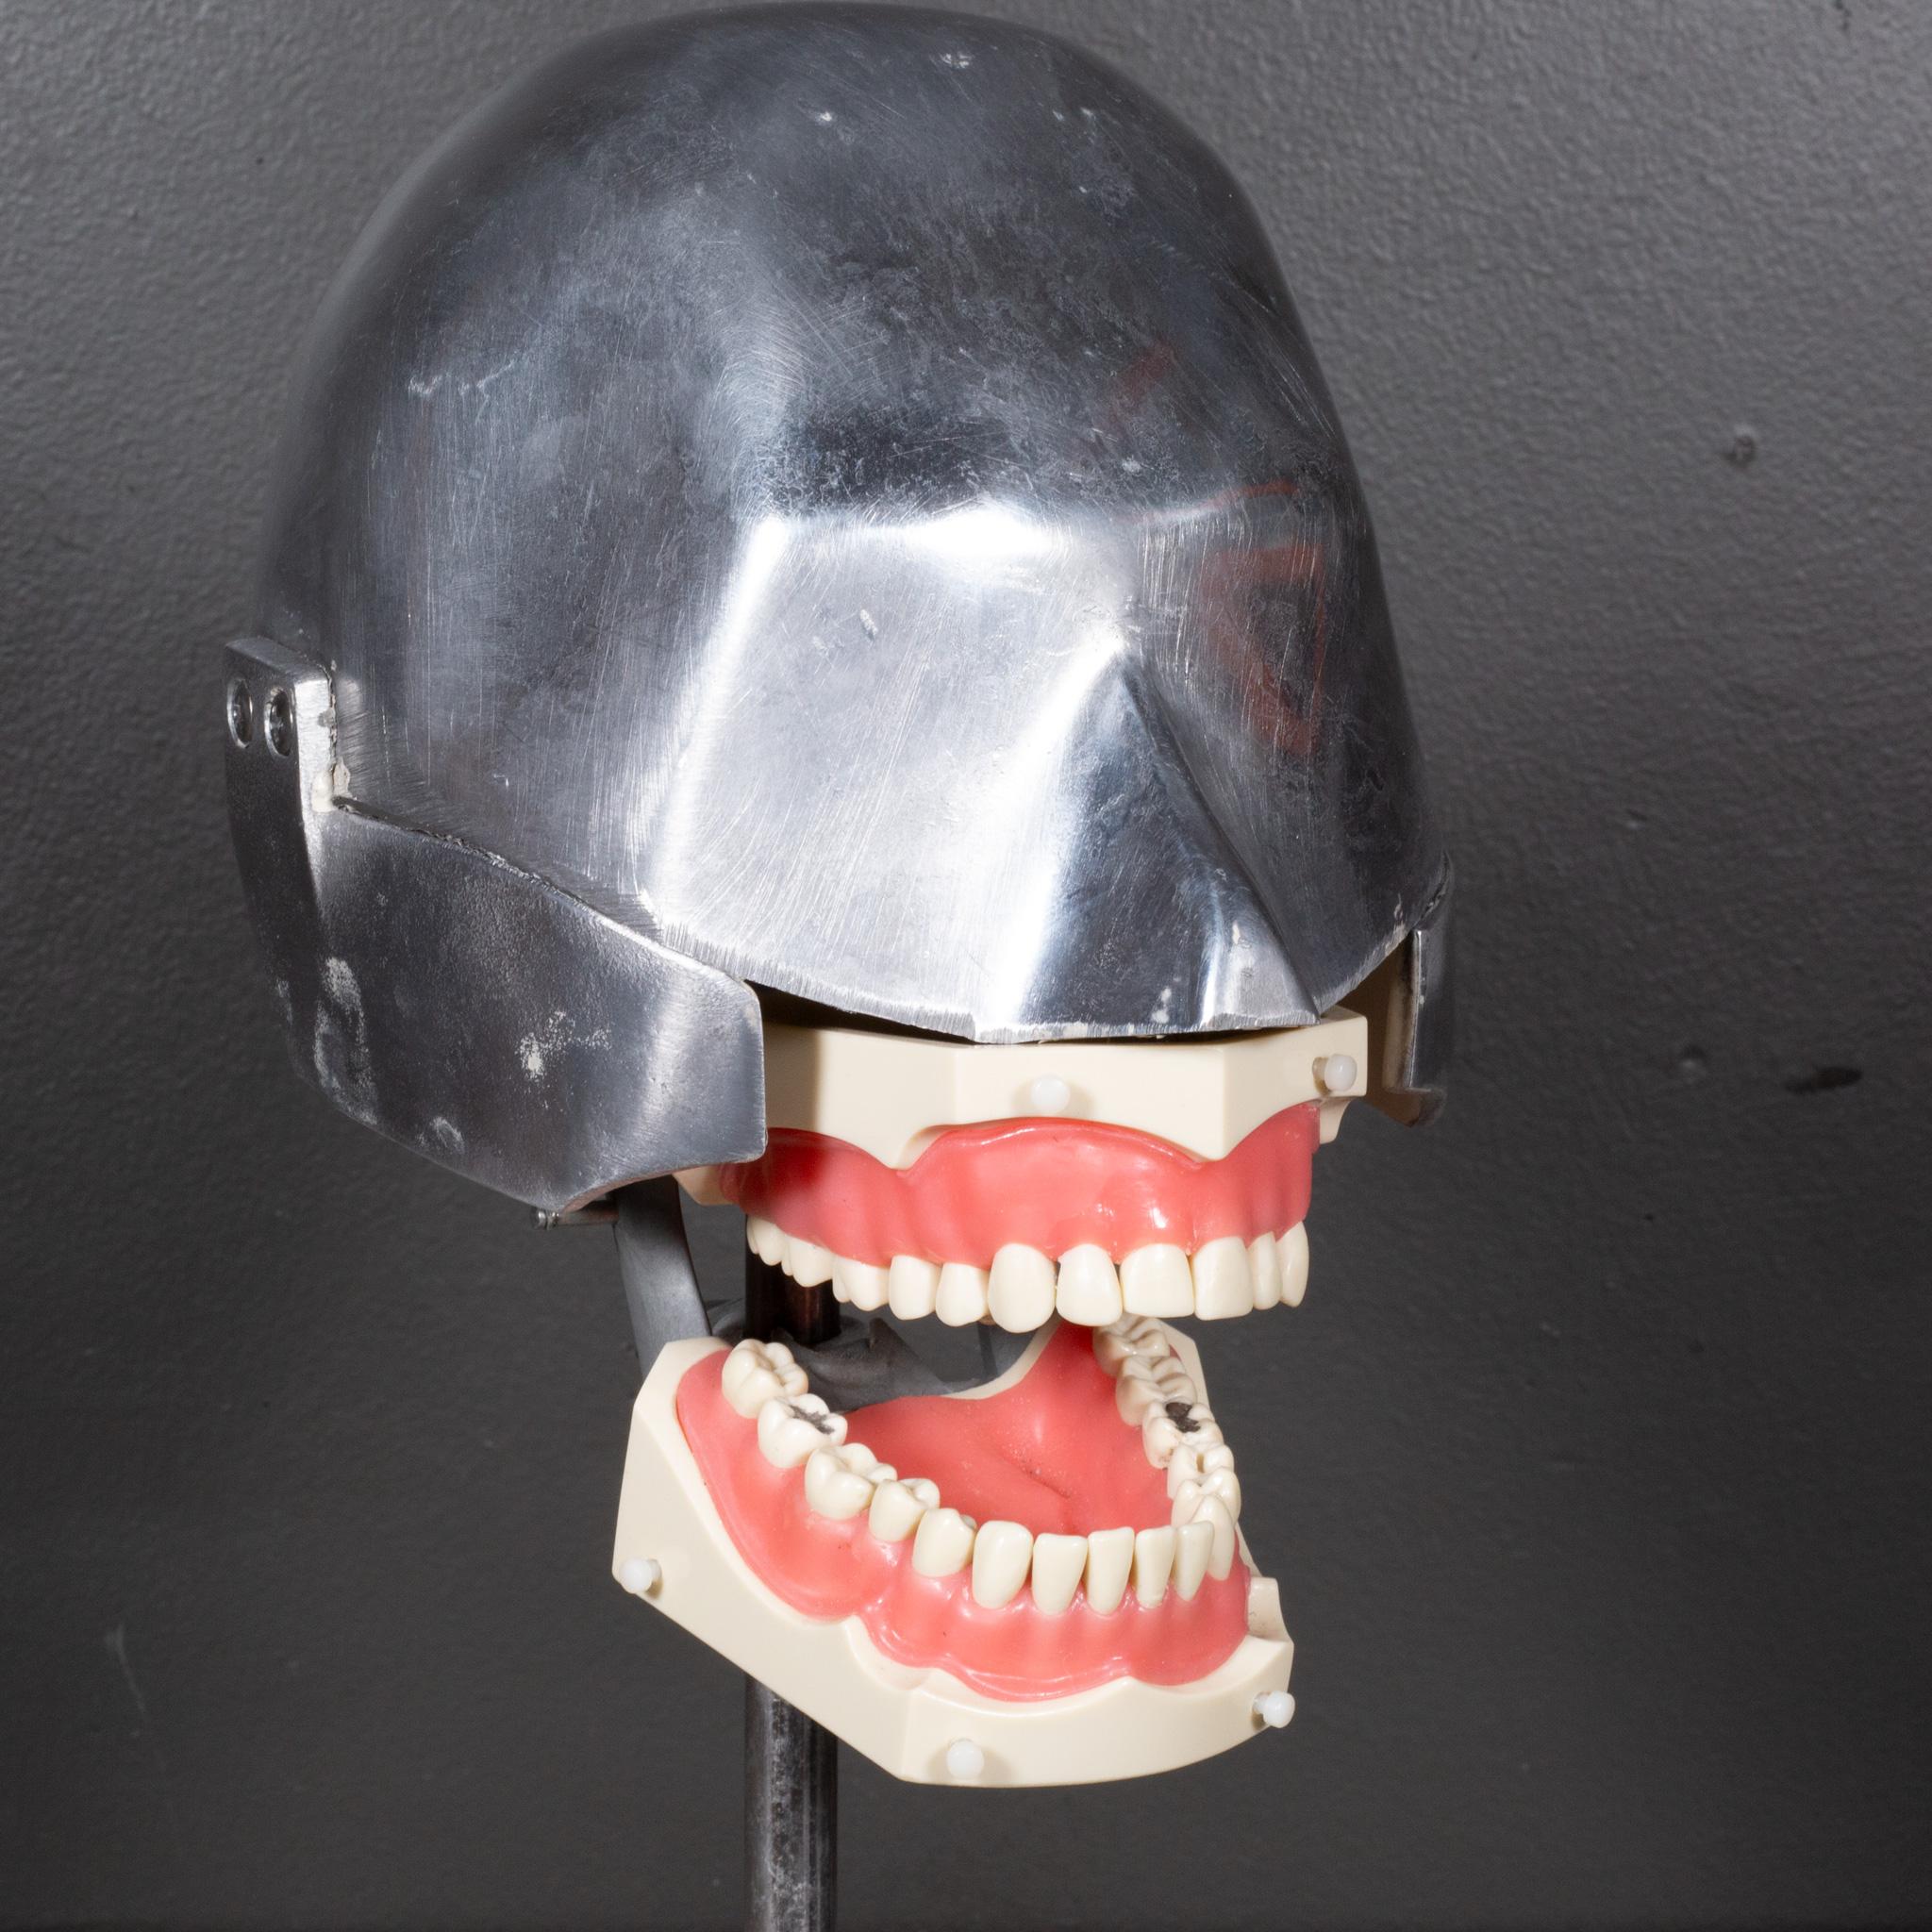 ABOUT
A mid-century dental school practice head, known as a dental phantom head, with aluminum skull, articulating mouth and solid steel custom stand. Very training purposes, the mouth is anatomically accurate with soft, rubber gums and removable